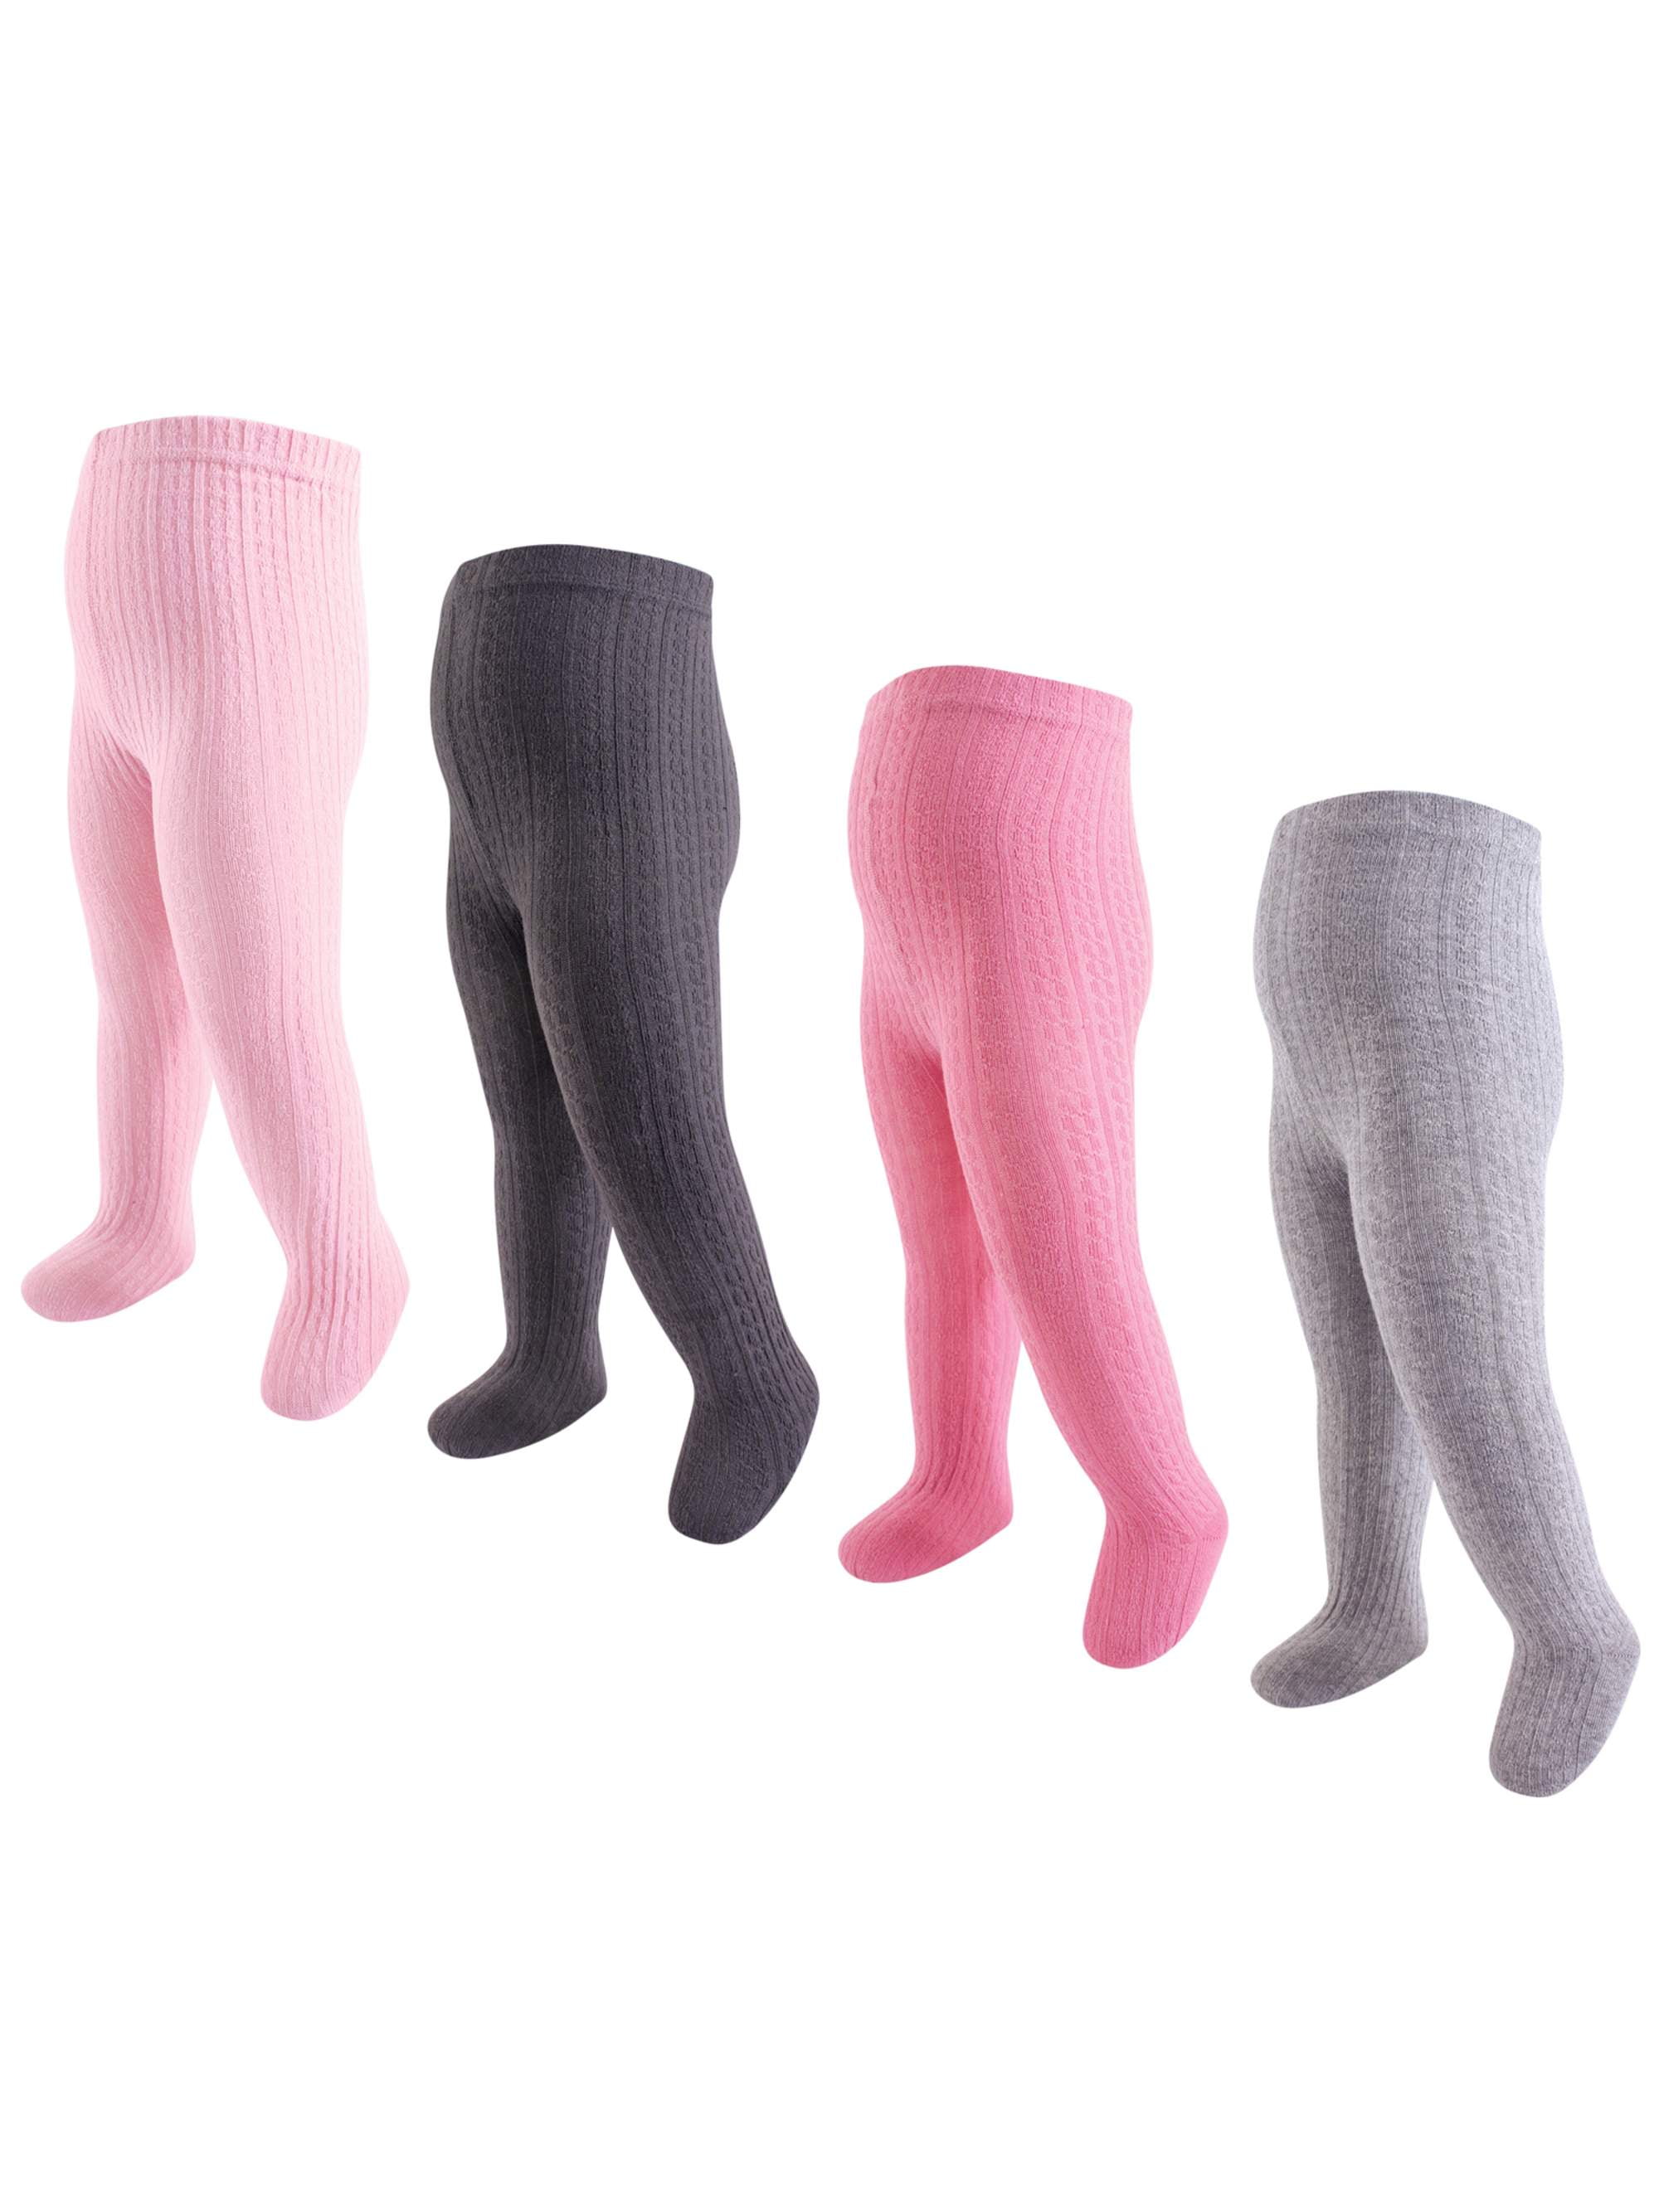 Hudson Baby - Cable Knit Cotton Tights 4pk (Baby Girls) - Walmart.com ...